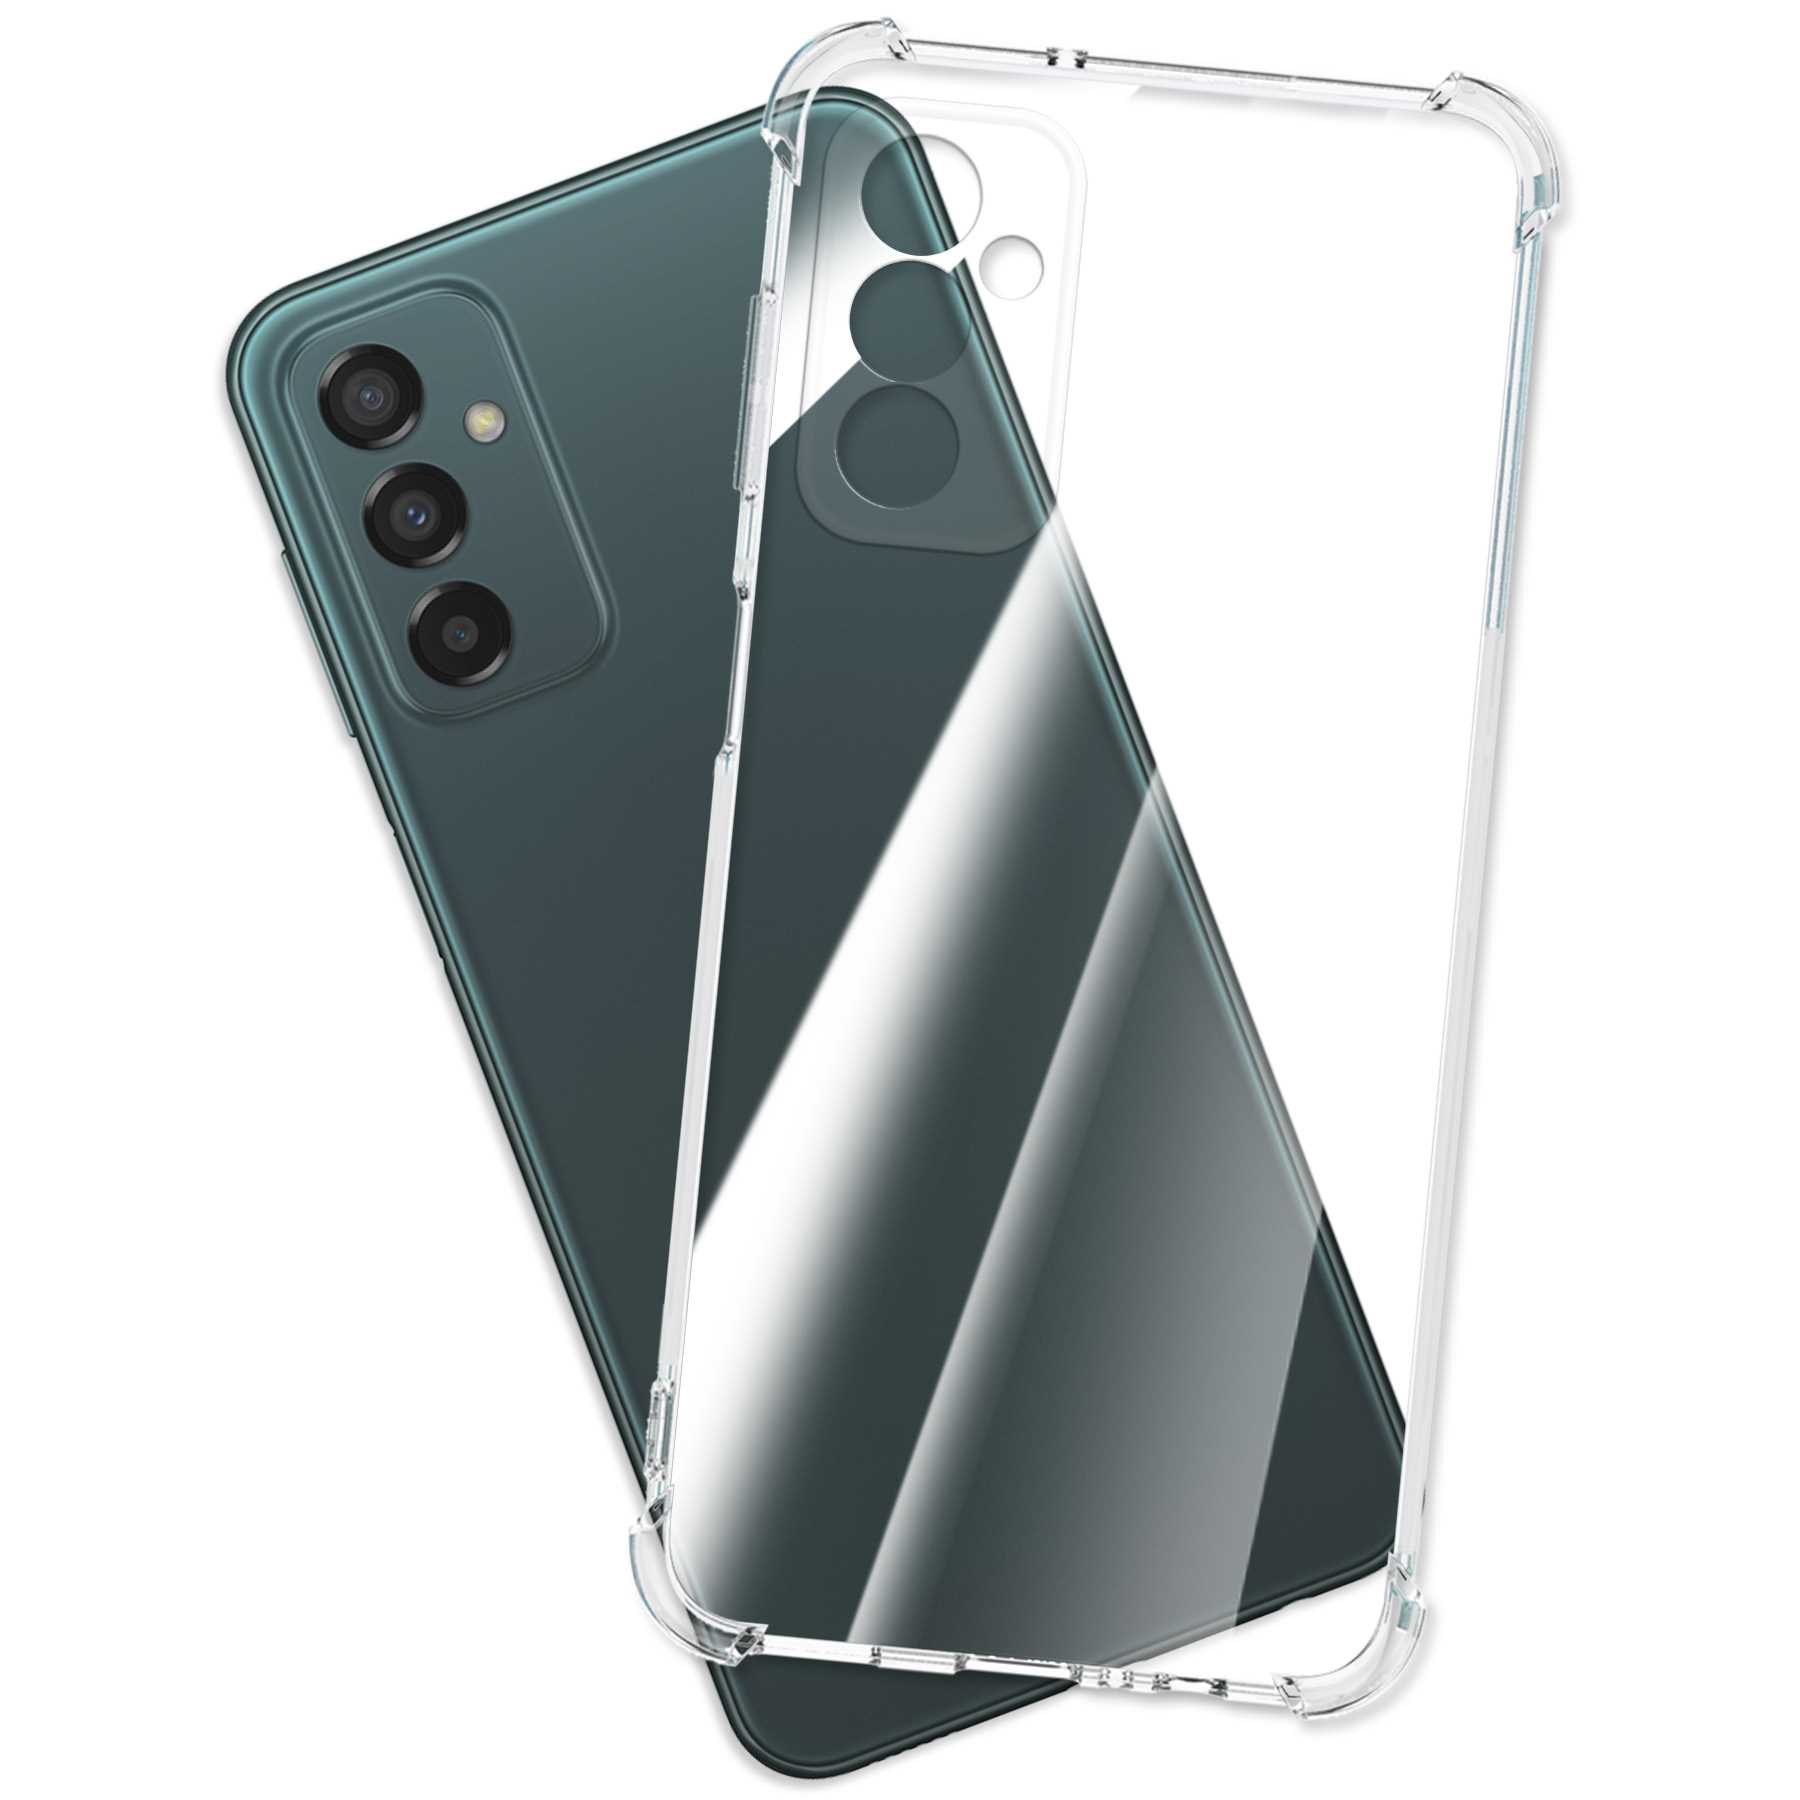 MTB M23 Transparent Samsung, Galaxy Case, ENERGY MORE 5G, Backcover, Armor Clear